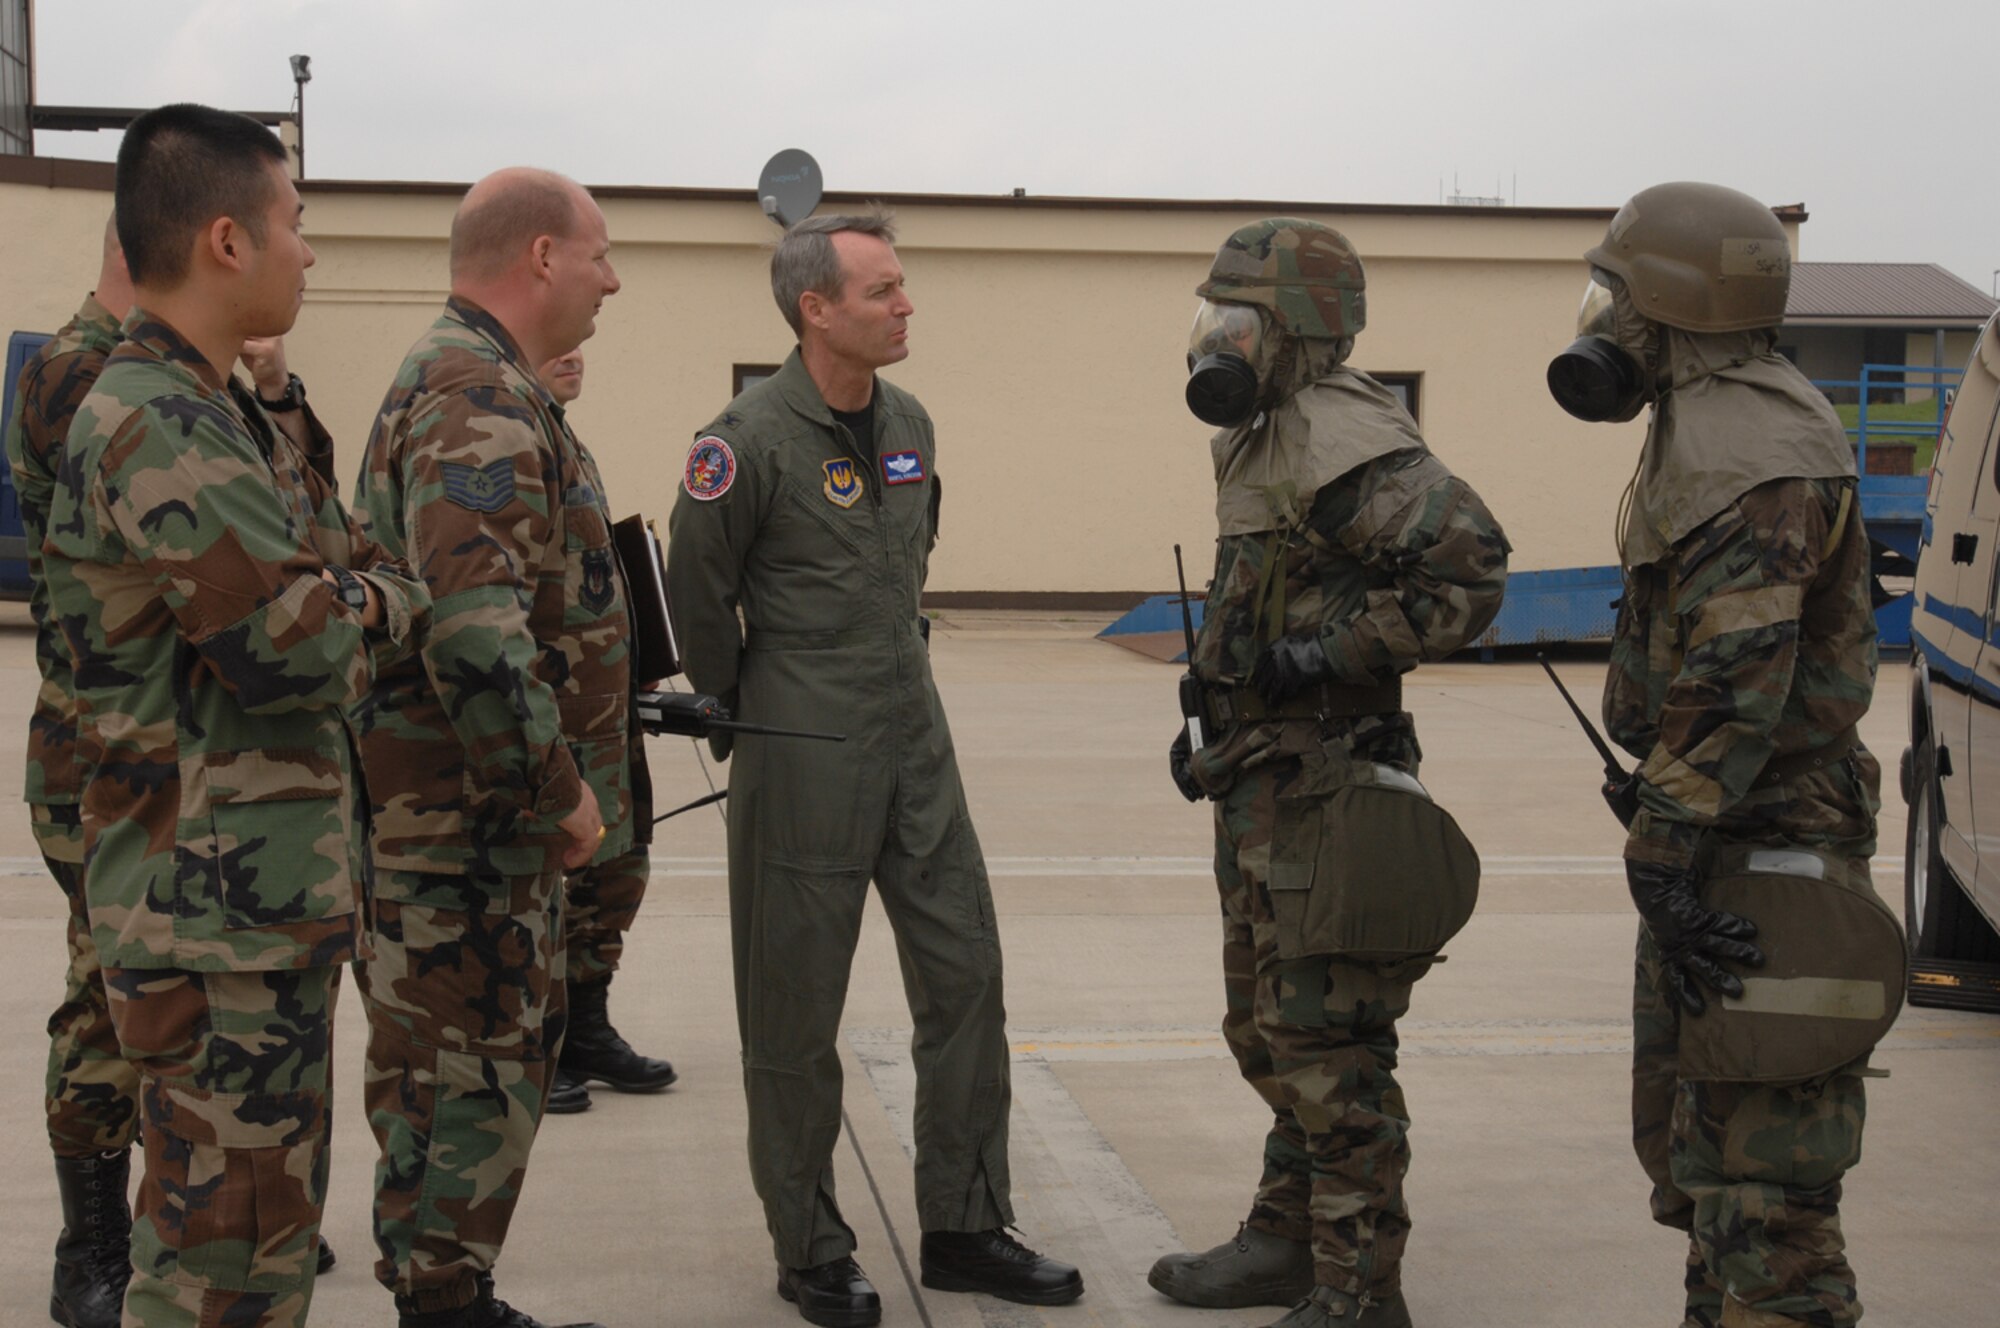 SPANGDAHLEM AIR BASE, GERMANY -- From left: 1st Lt. William Vu, 52nd Aircraft Maintenance Squadron, Tech. Sgt. Michael Powers, 52nd Logistics Readiness Squadron, Col. Darryl Roberson, 52nd Fighter Wing commander, and Tech. Sgt. Timothy Beers and Staff Sgt. Benjamin Turner from 52nd LRS in chemical protective gear. Lieutenant Vu spent the day with the commander as part of the Commander’s Shadow Program. Lieutenant Vu, a Houston native, is an assistant officer in charge with the 23rd Aircraft Maintenance Unit and leads more than 219 technicians in six AFSCs. He’s been in the Air Force for two years and hopes to earn a master’s degree in the next five years. He and the commanders observed Airmen from 52nd AMXS and 52nd LRS as they performed decontamination duties. The units demonstrated their war-fighting skills in preparation for the upcoming NATO OPEVAL. (US Air Force photo/Airman 1st Class Emily Moore) 